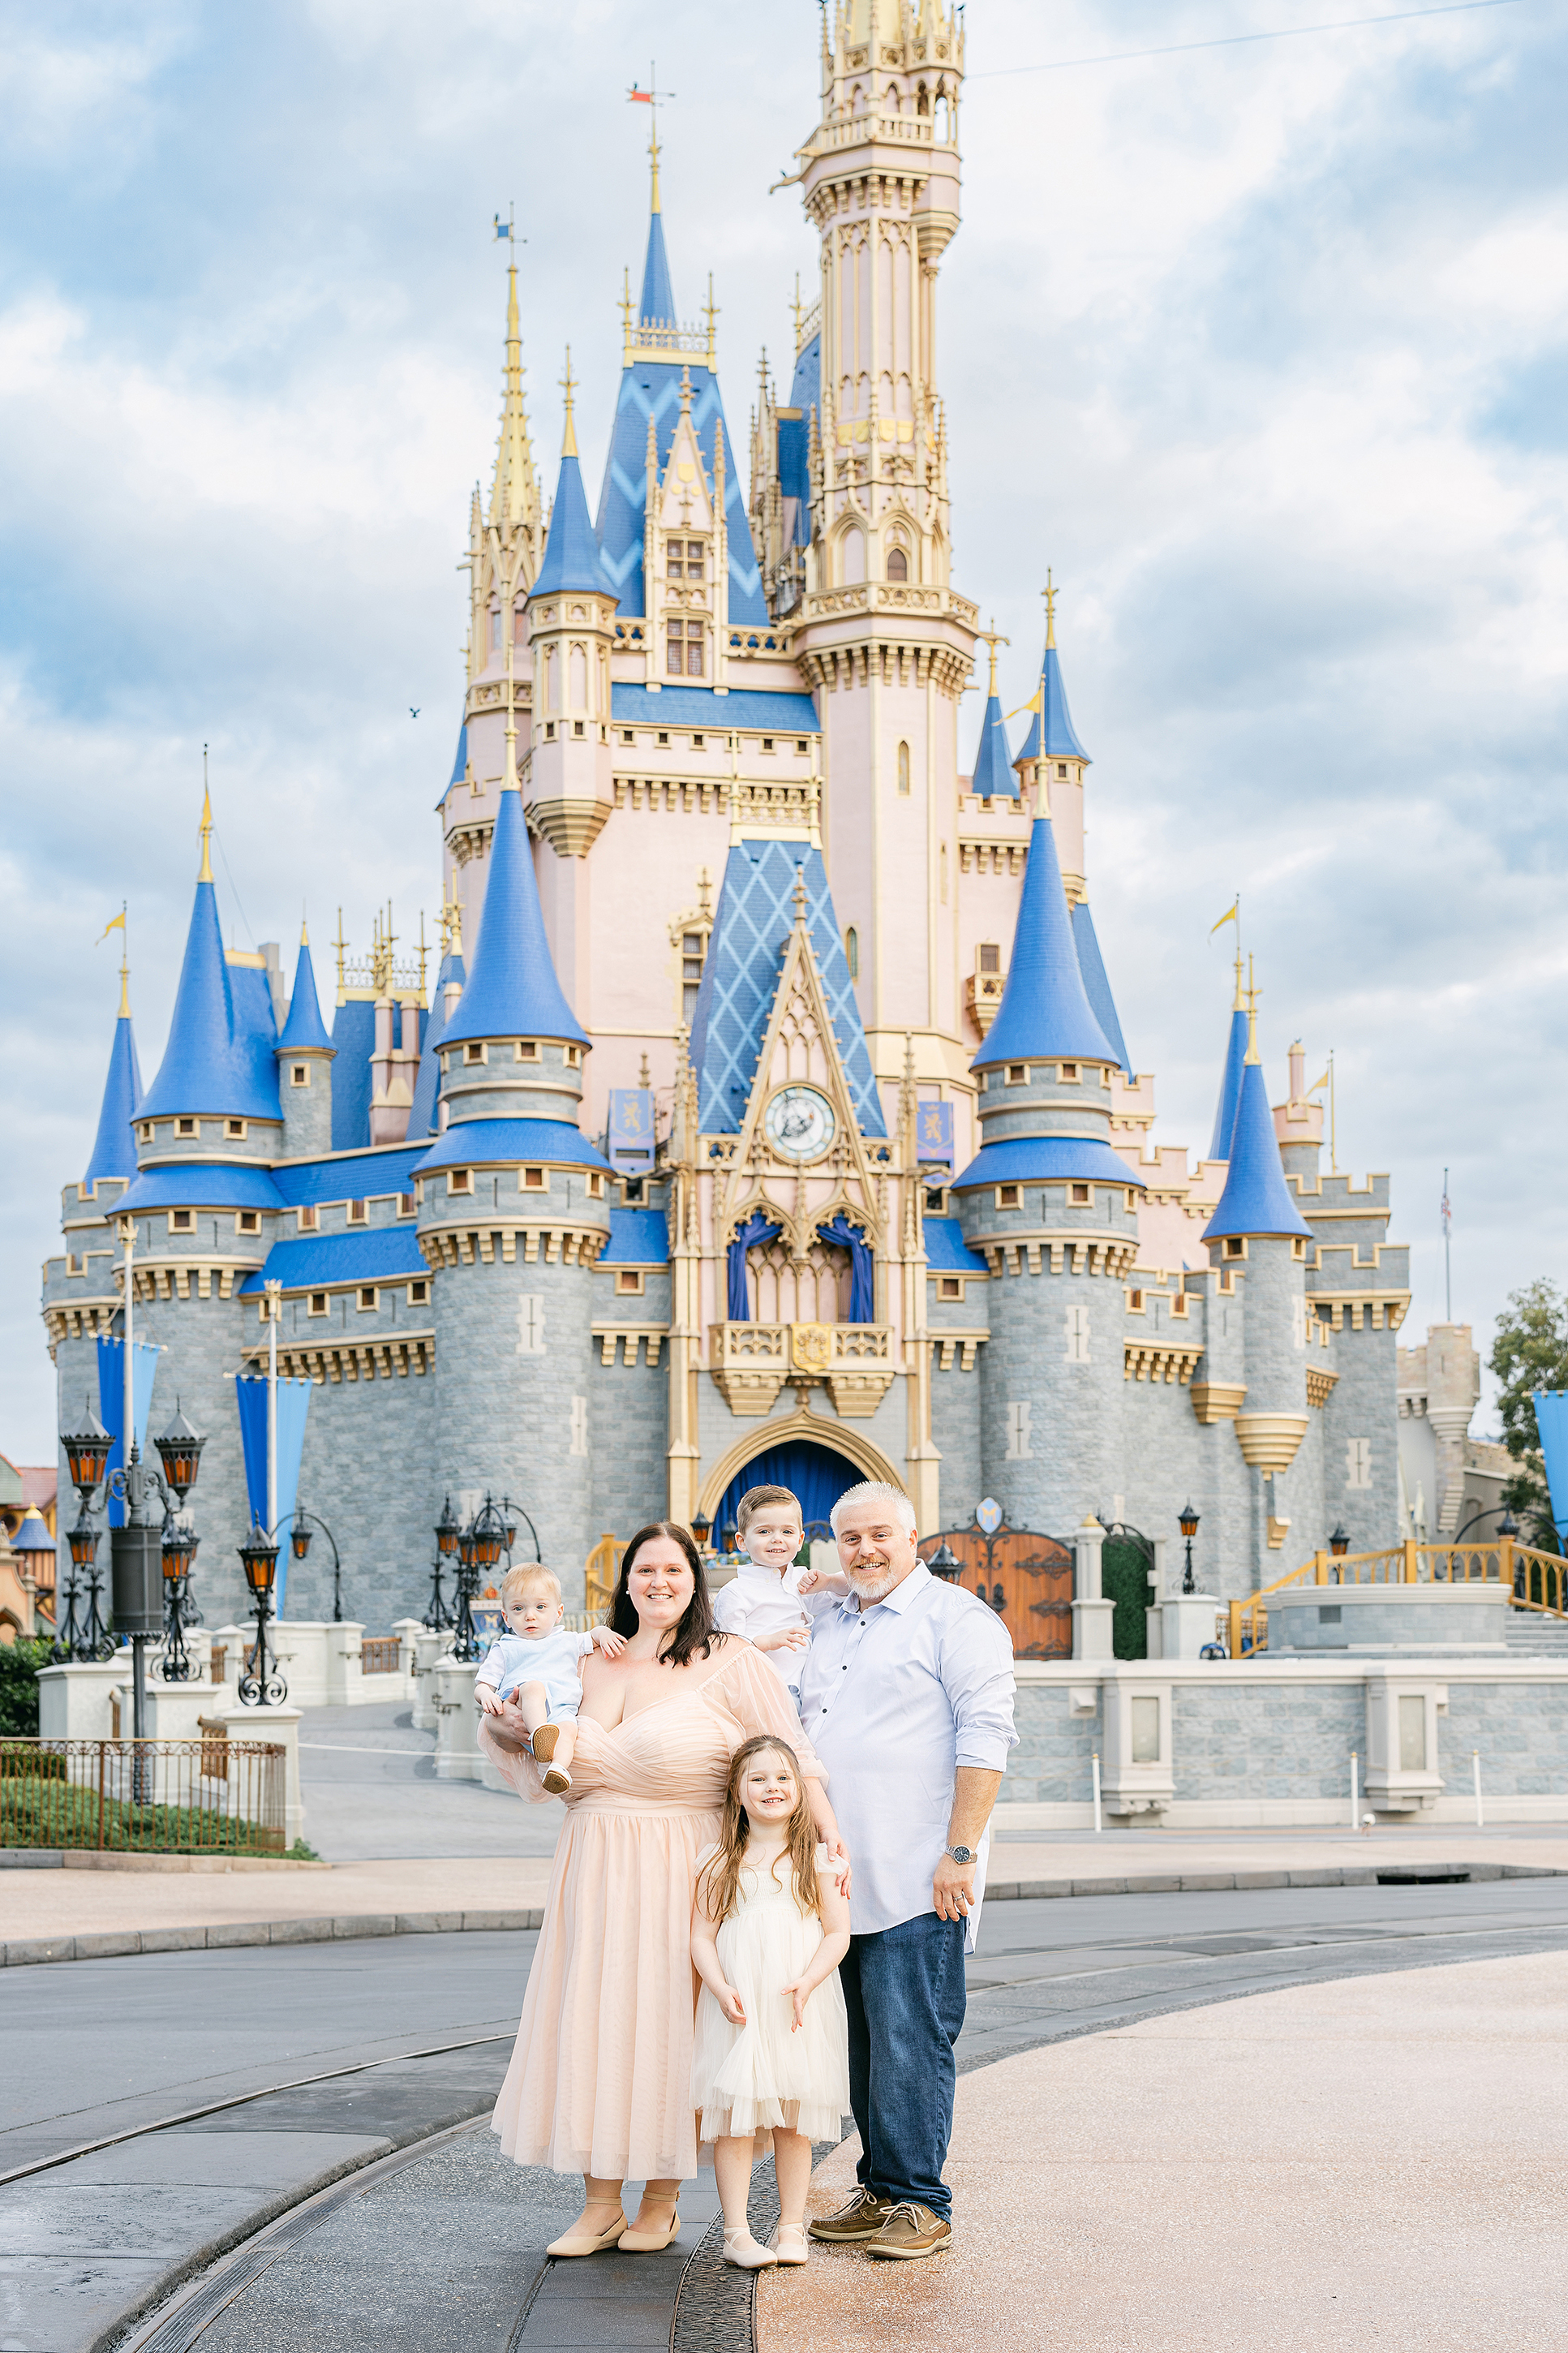 A family of five stands in front of Cinderella's Castle at the Magic Kingdom Park in Orlando, Florida.